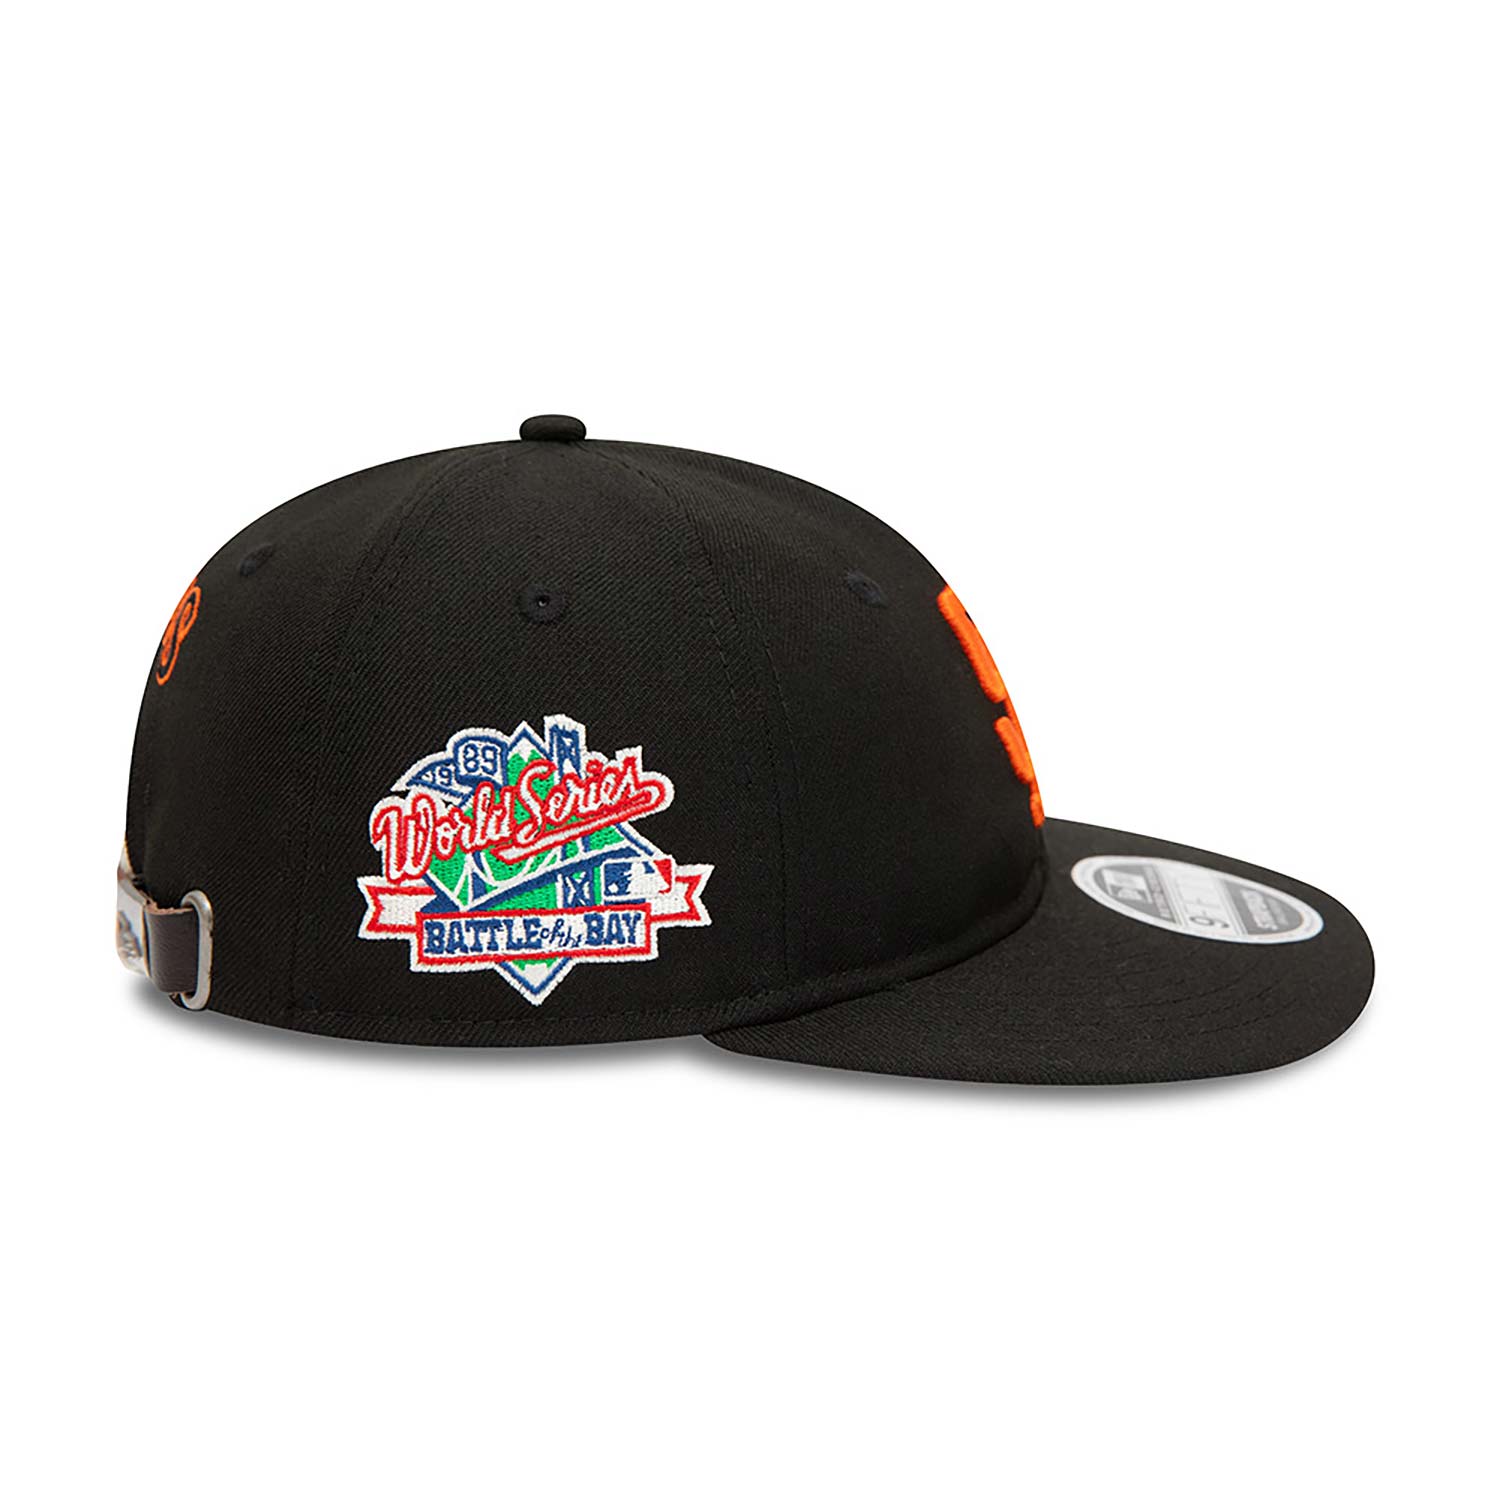 San Francisco Giants Cooperstown Multi Patch Black 9FIFTY Snapback Cap